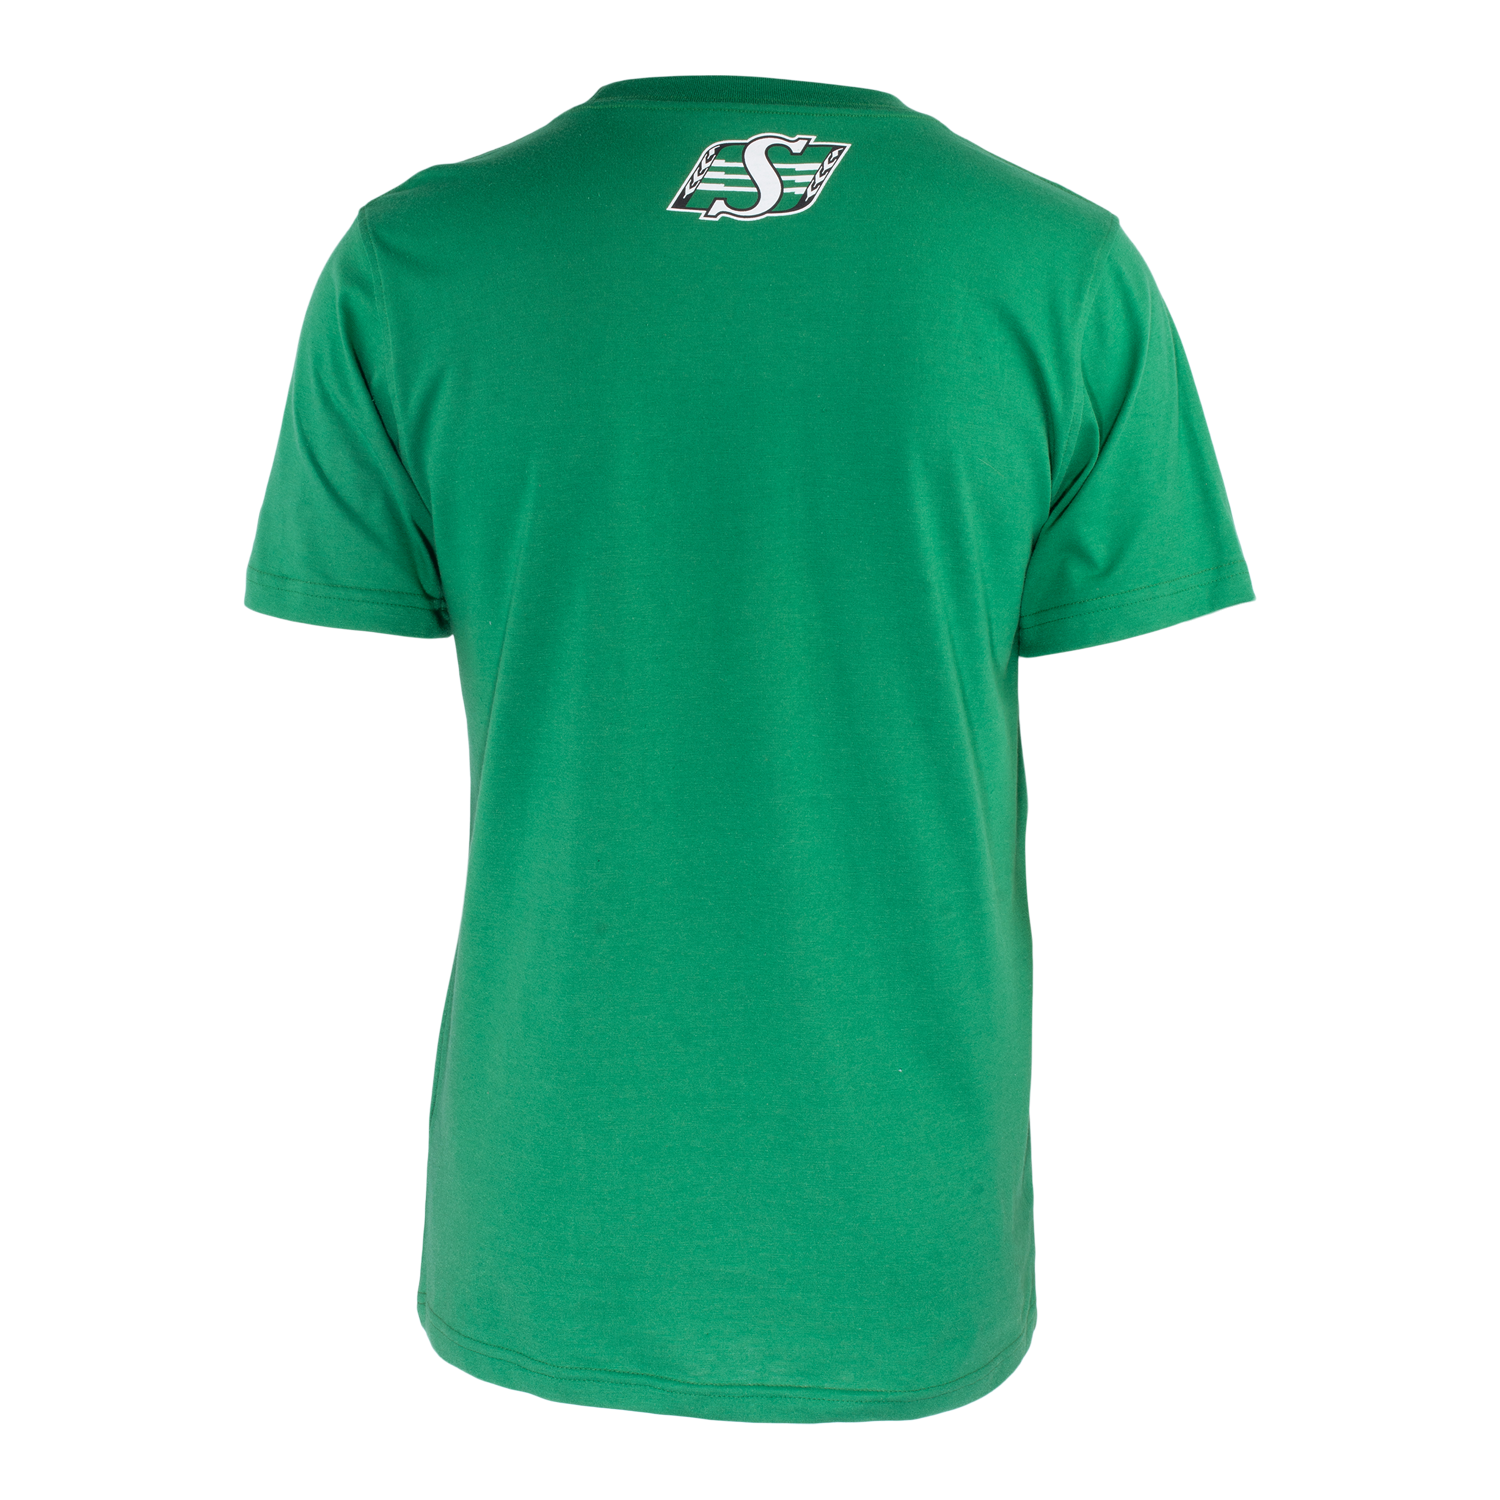 Ace Short Sleeve Graphic Tee Green